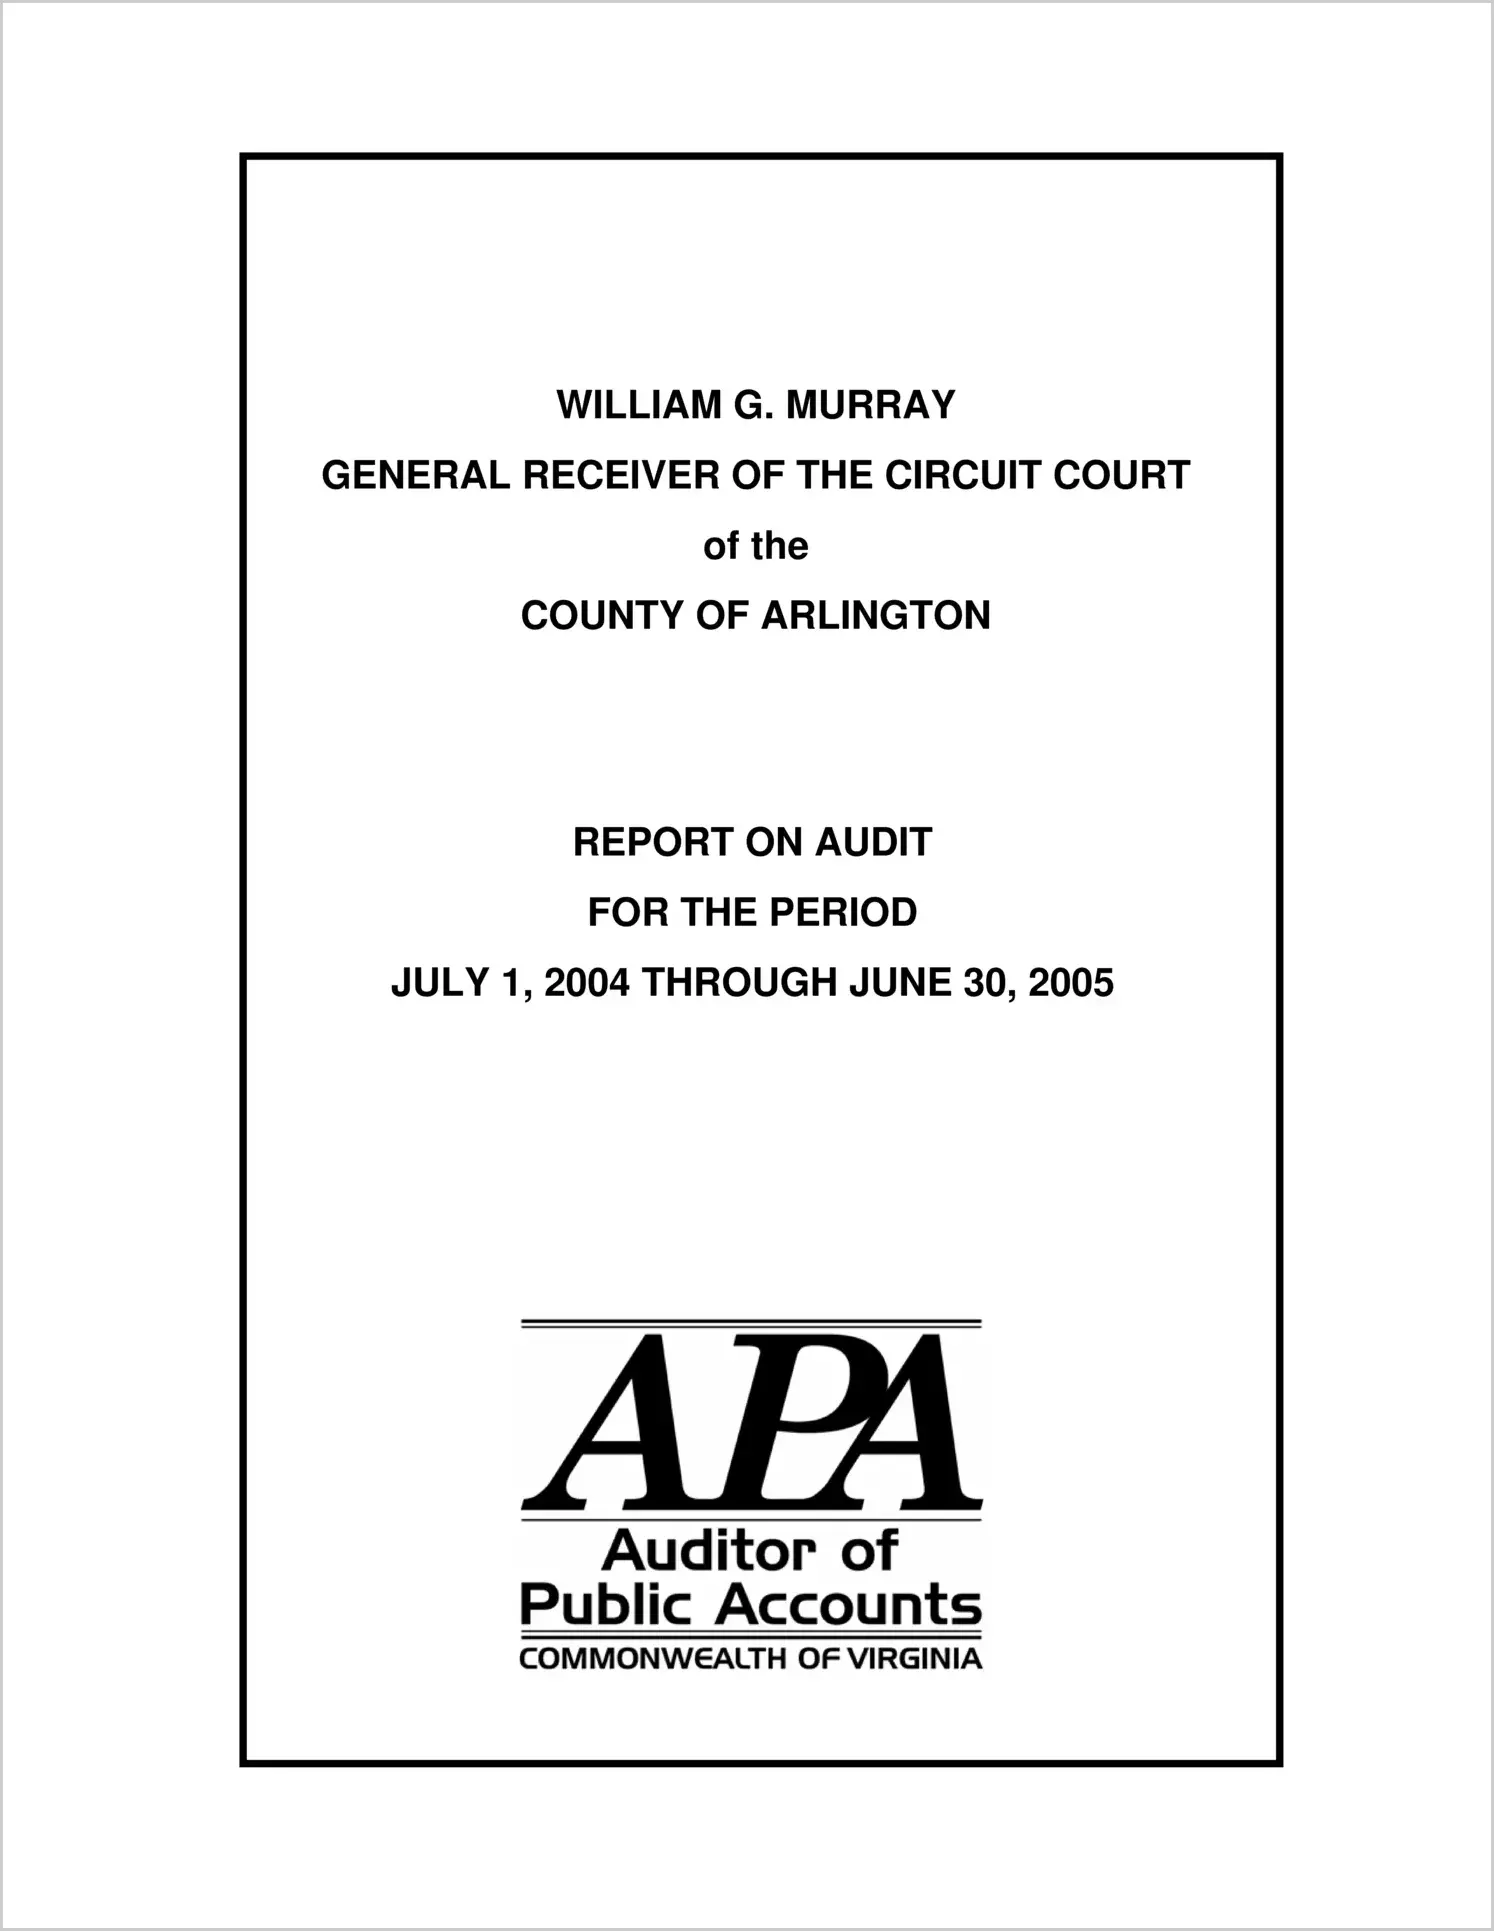 General Receiver of the Circuit Court of the County of Arlington for the period July 1, 2004 through June 30, 2005